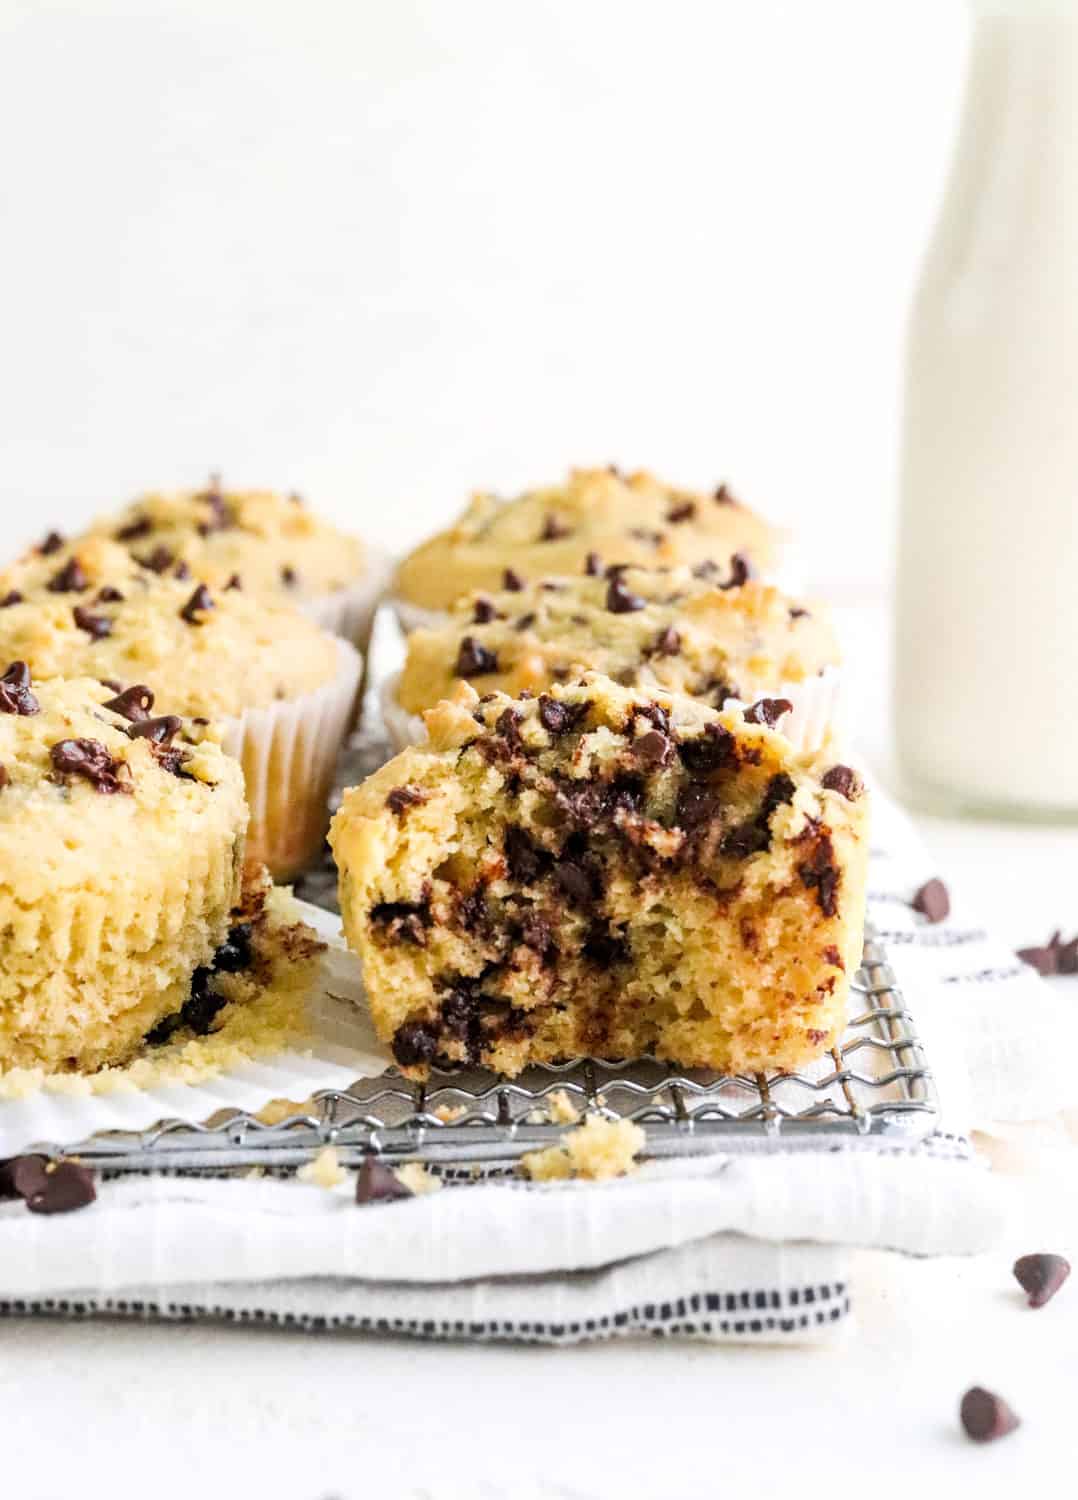 Tow rows of baked chocolate chip muffins with a bite taken out of one in the front on a wire rack on top of a white linen with more chocolate chips around it and a jug of milk behind it. 